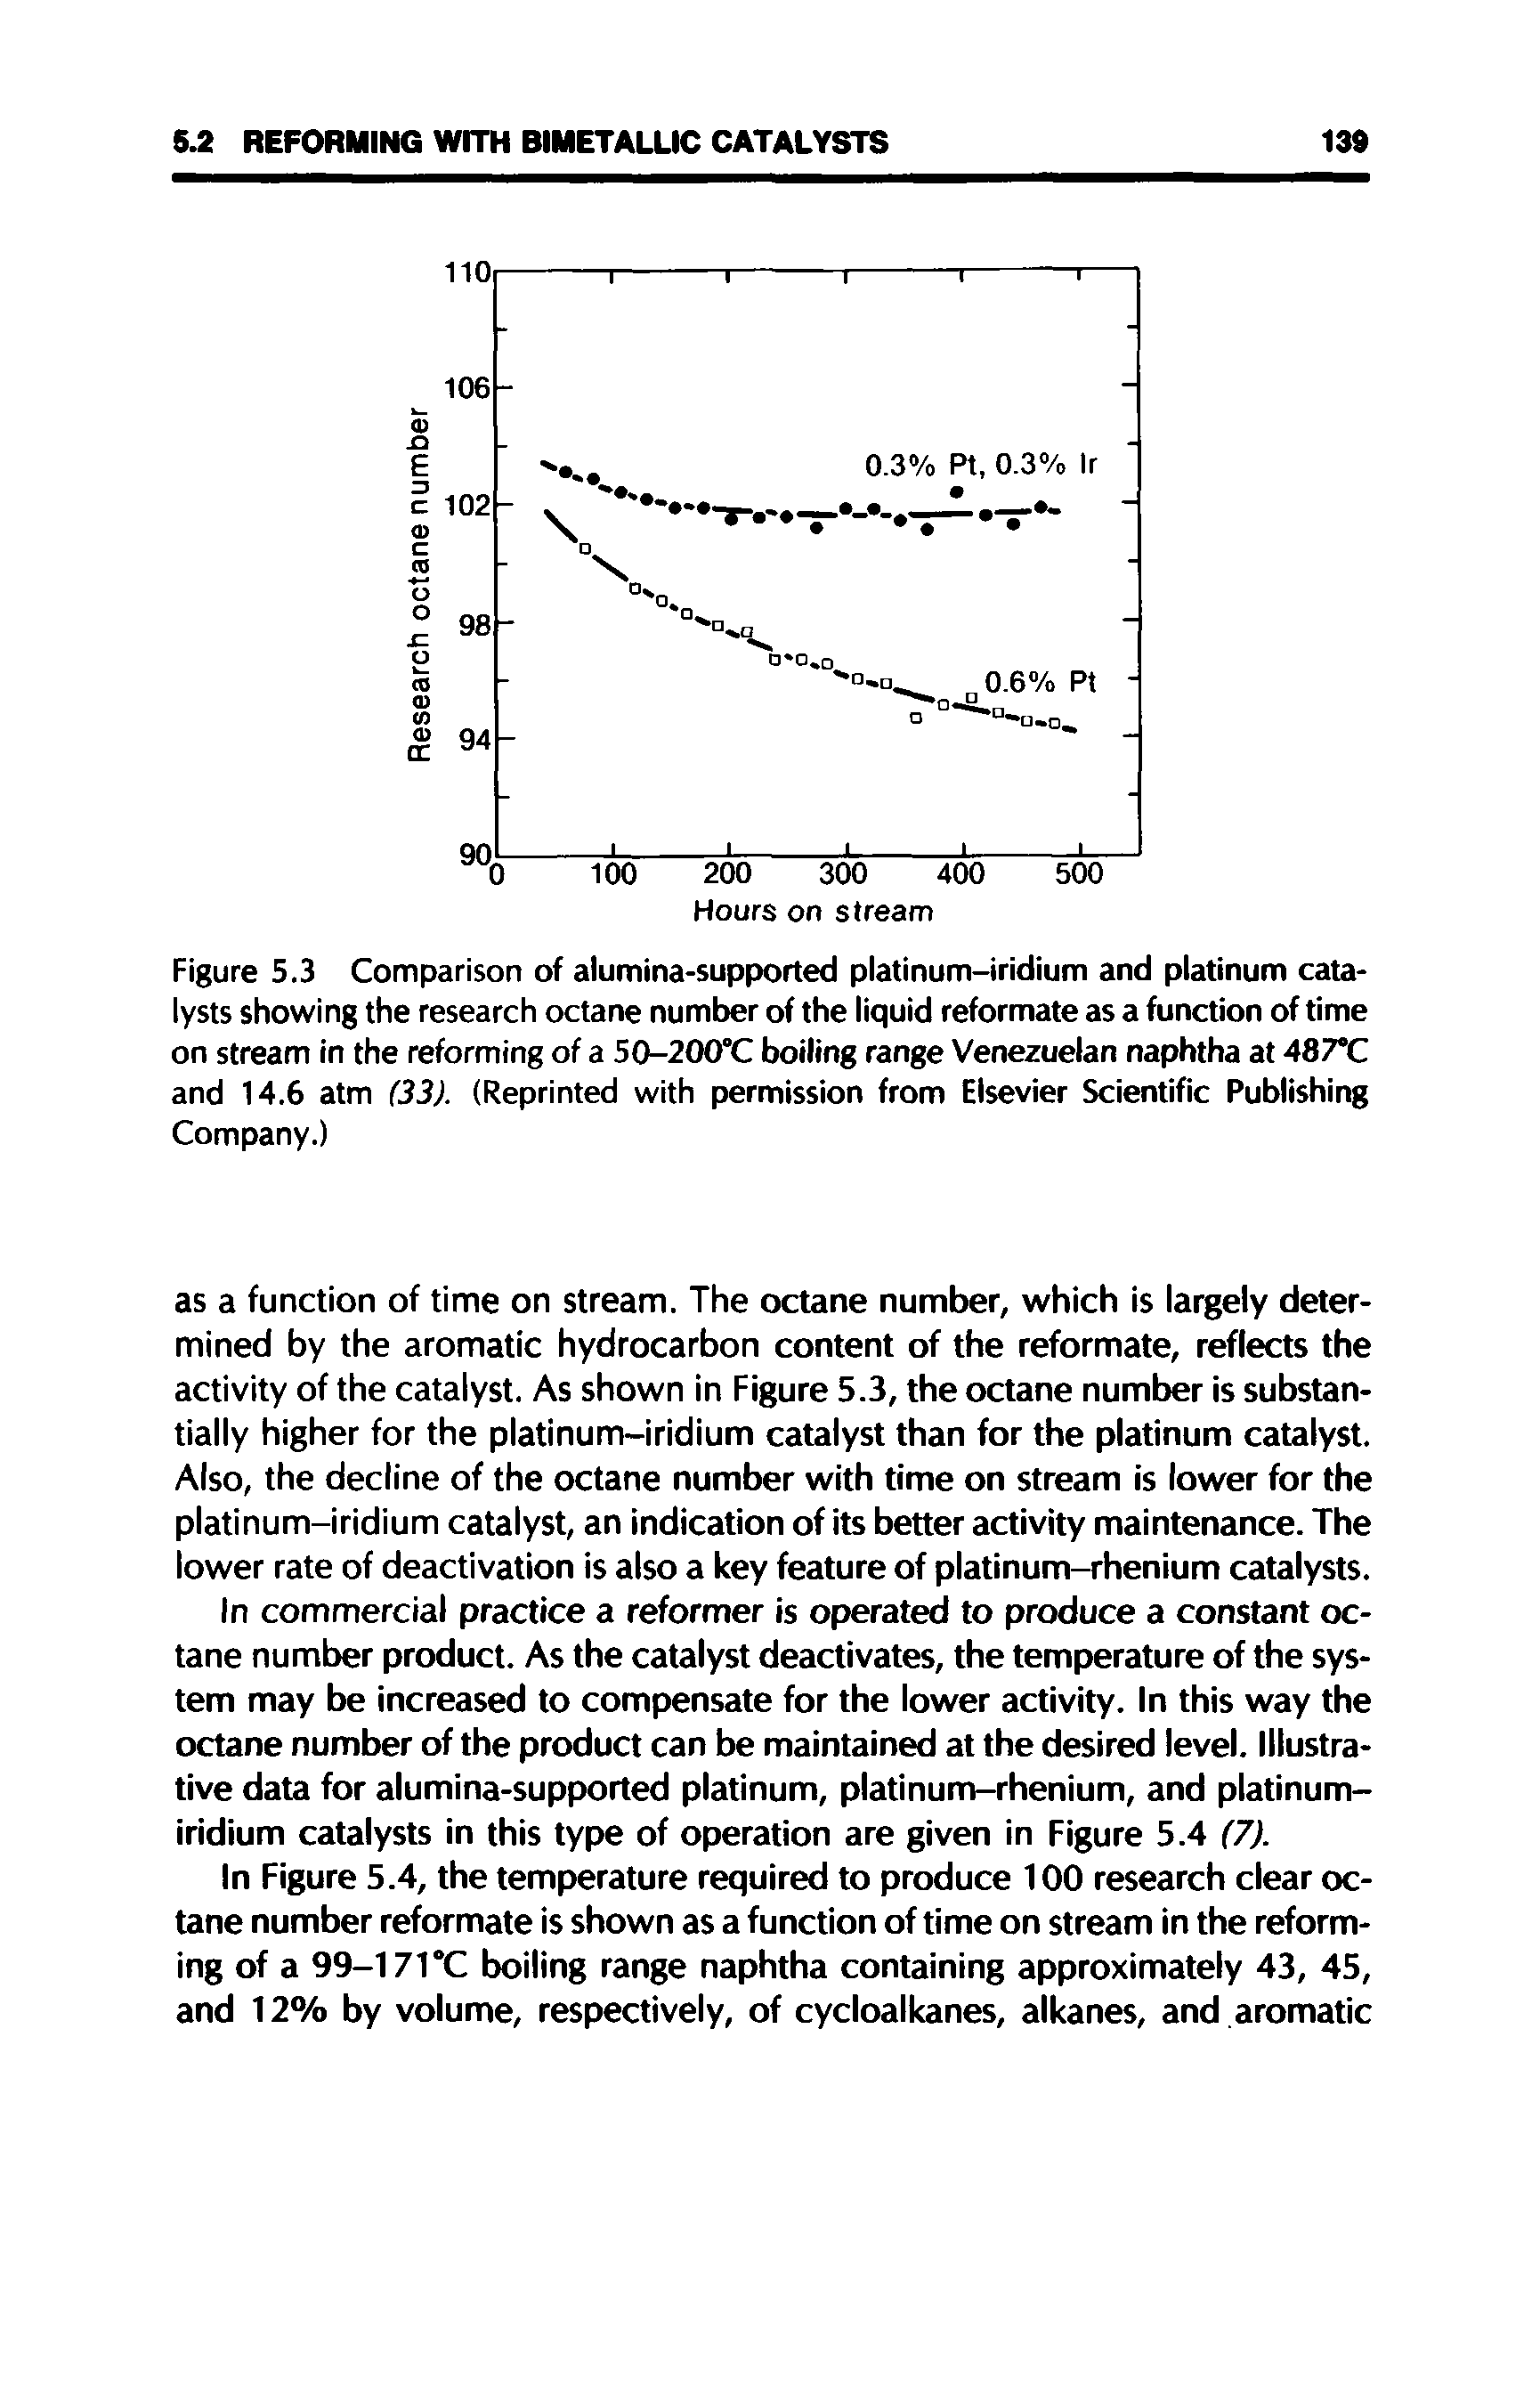 Figure 5.3 Comparison of alumina-supported platinum-iridium and platinum catalysts showing the research octane number of the liquid reformate as a function of time on stream in the reforming of a 50-200°C boiling range Venezuelan naphtha at 487°C and 14.6 atm (33). (Reprinted with permission from Elsevier Scientific Publishing Company.)...